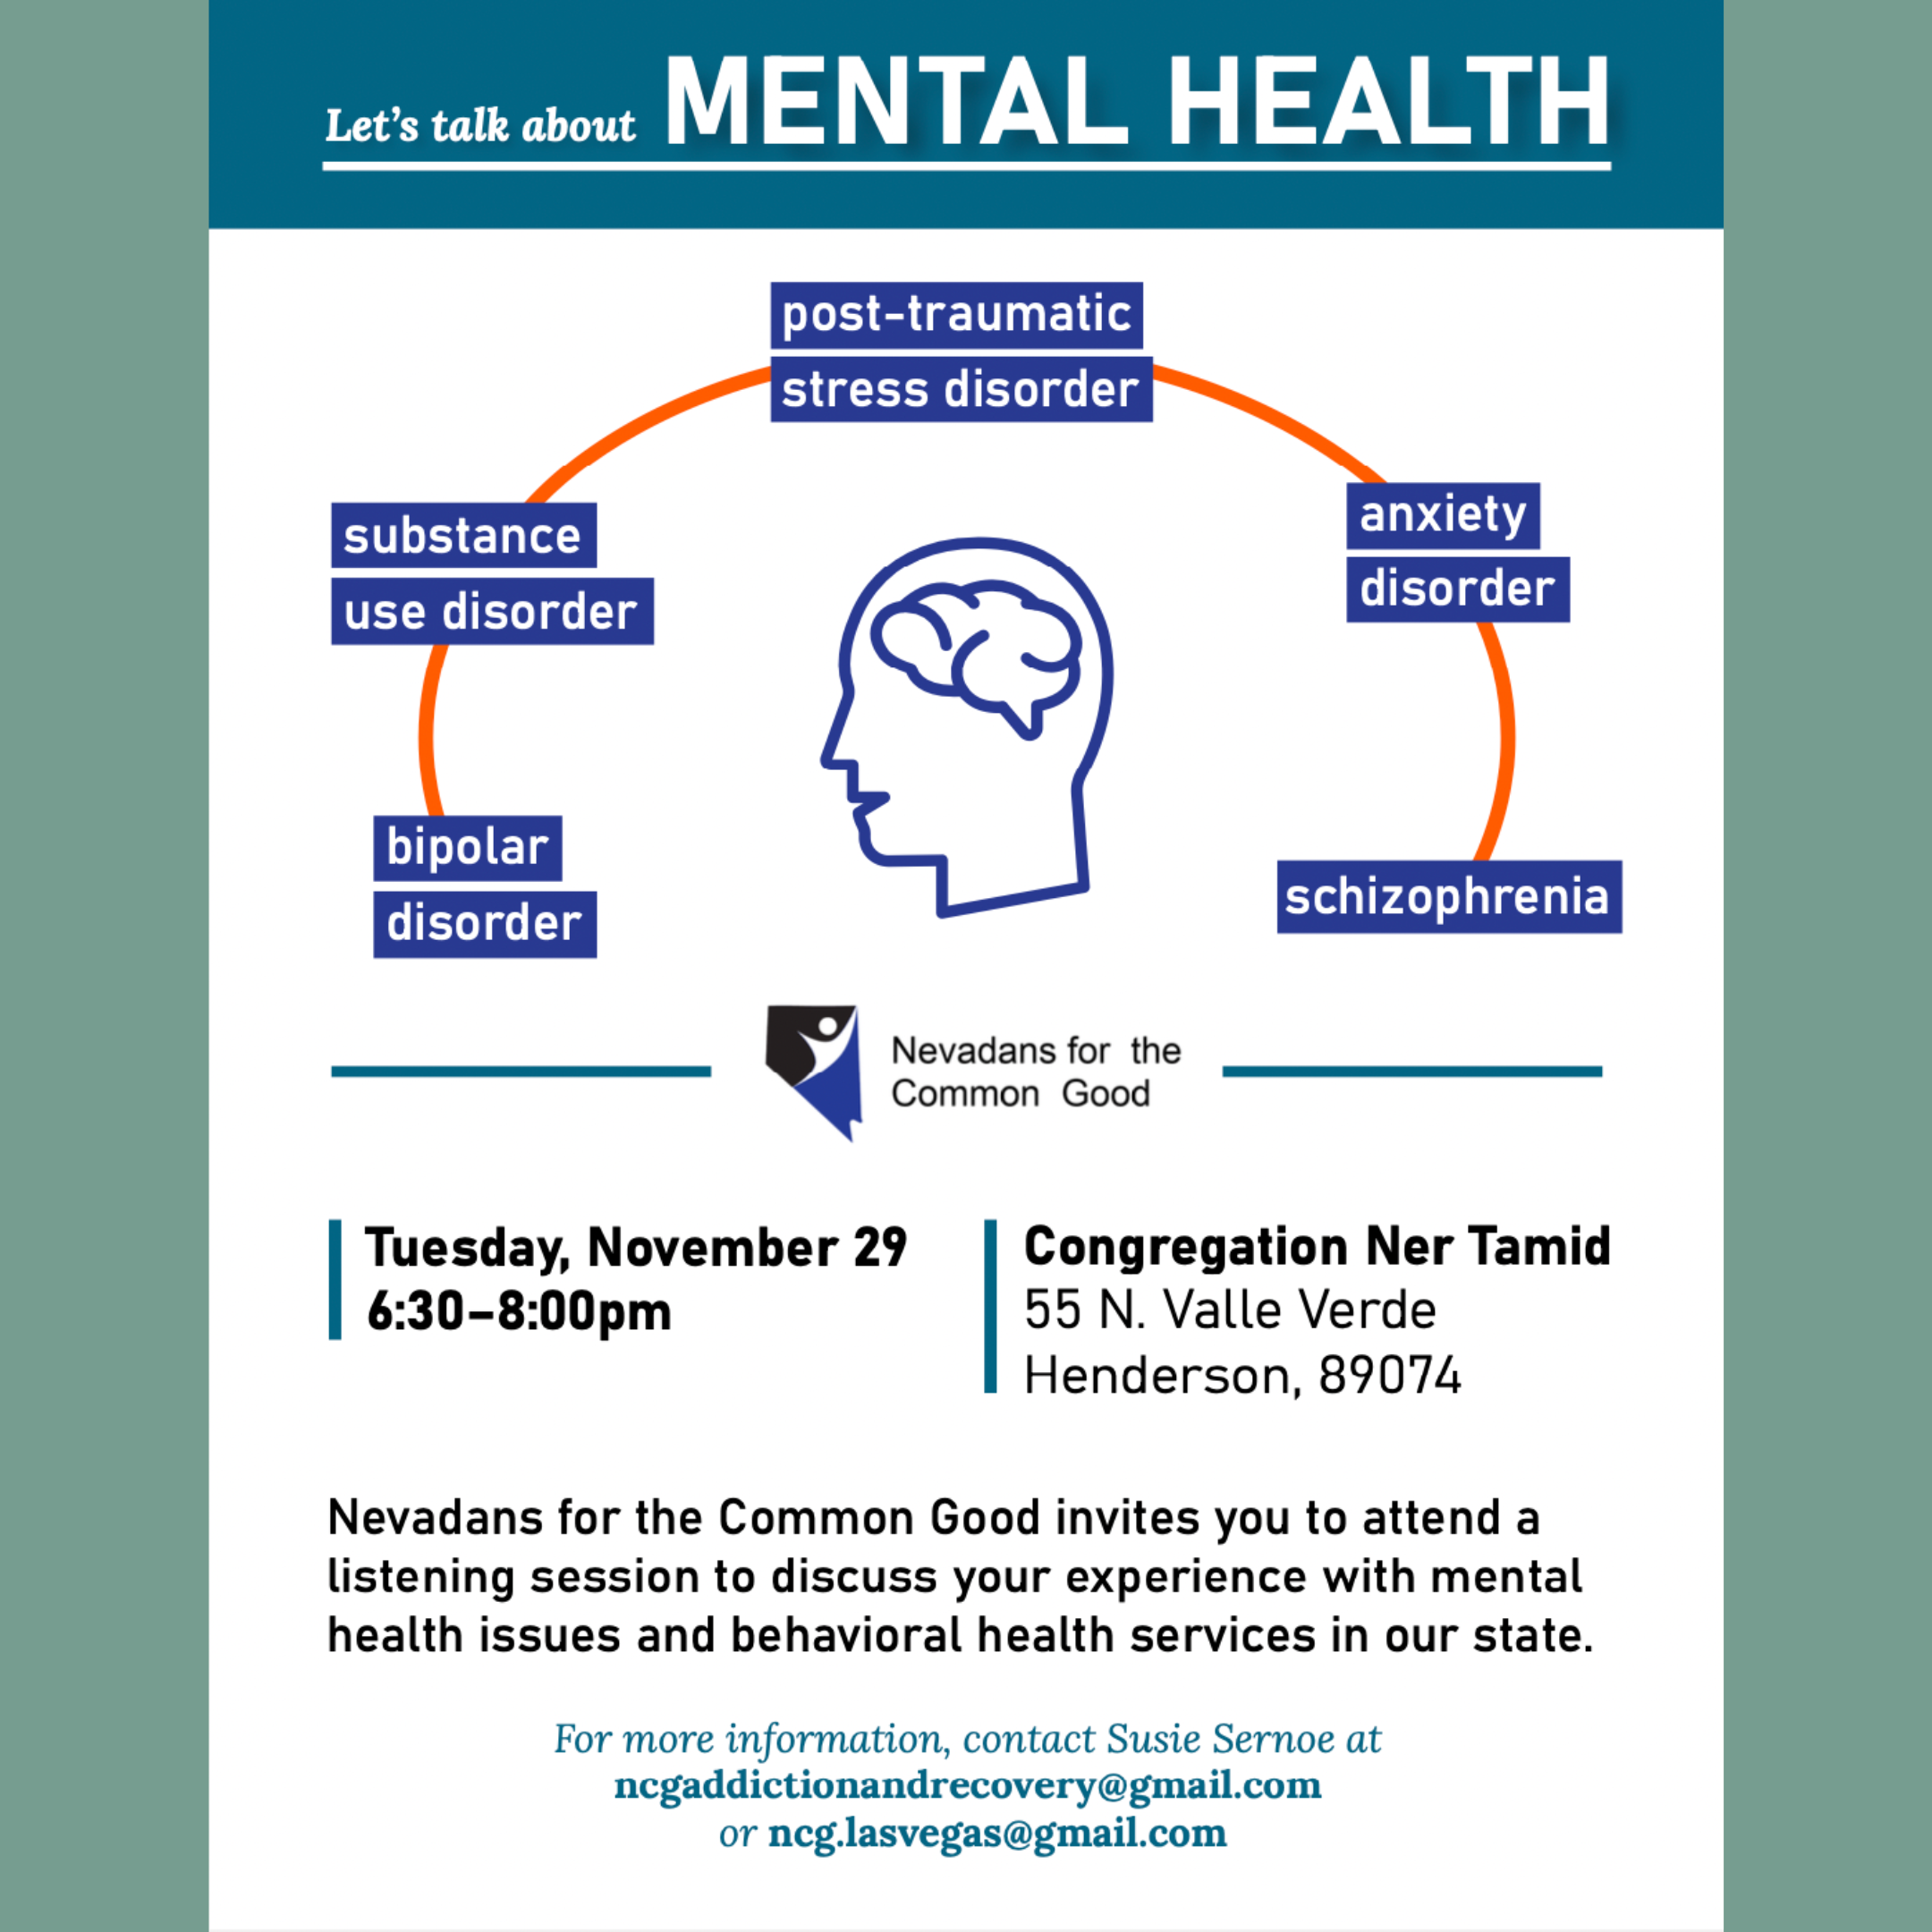 NEVADANS FOR THE COMMON GOOD HOSTS MENTAL HEALTH LISTENING SESSION AT CNT